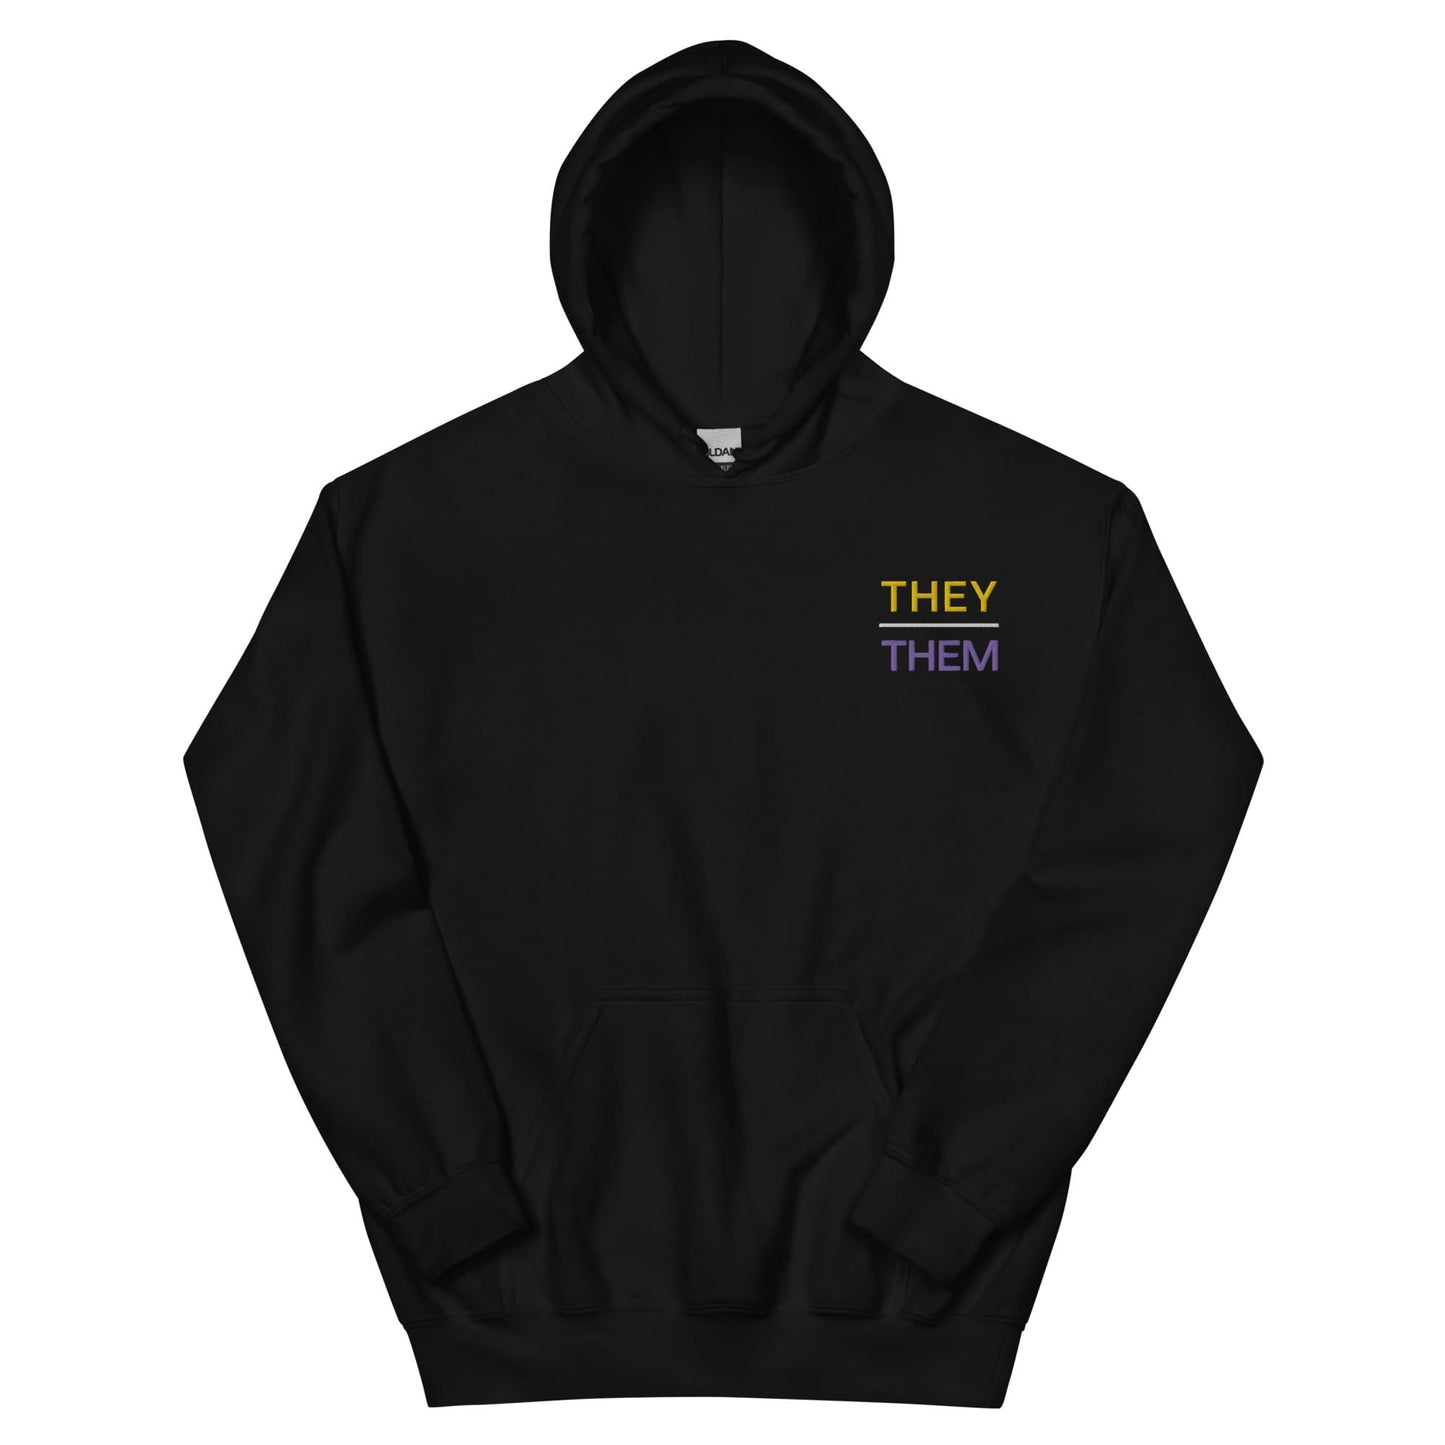 They them pronouns enby hoodie, embroidery